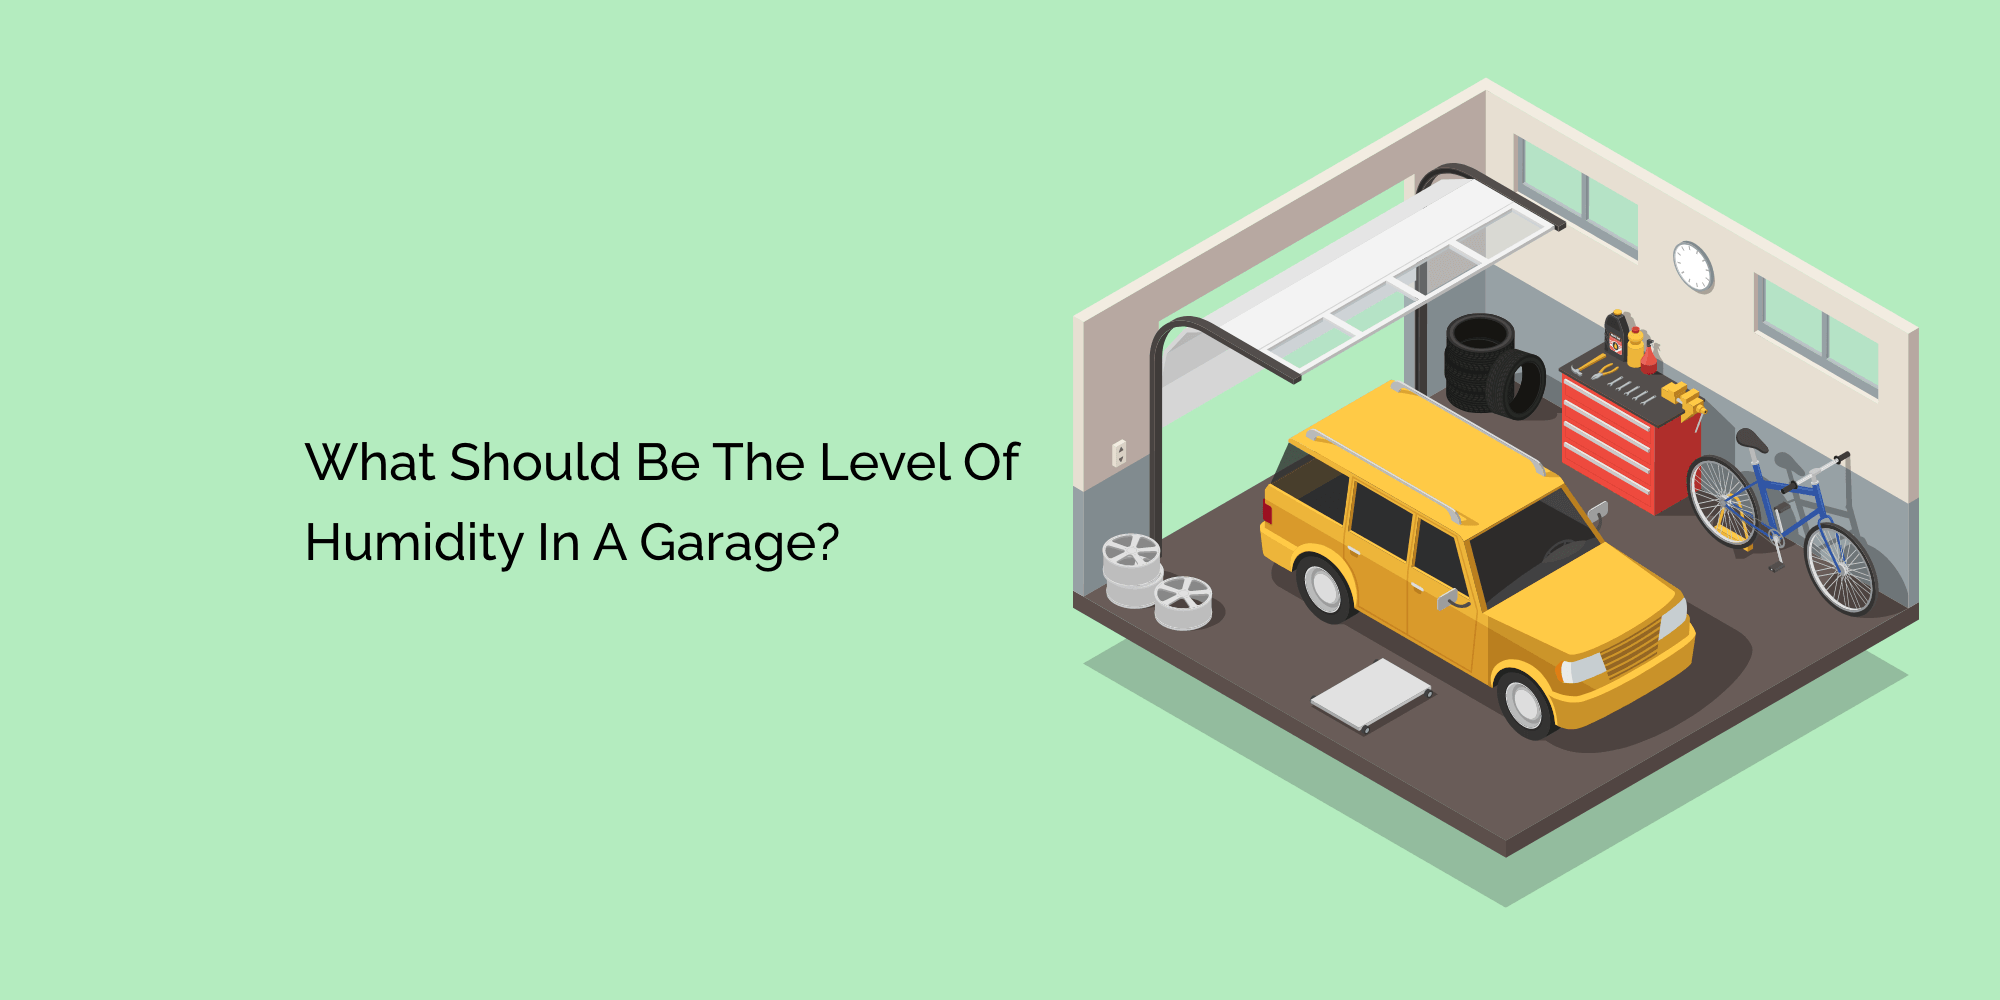 What should be the Level of Humidity in a Garage?